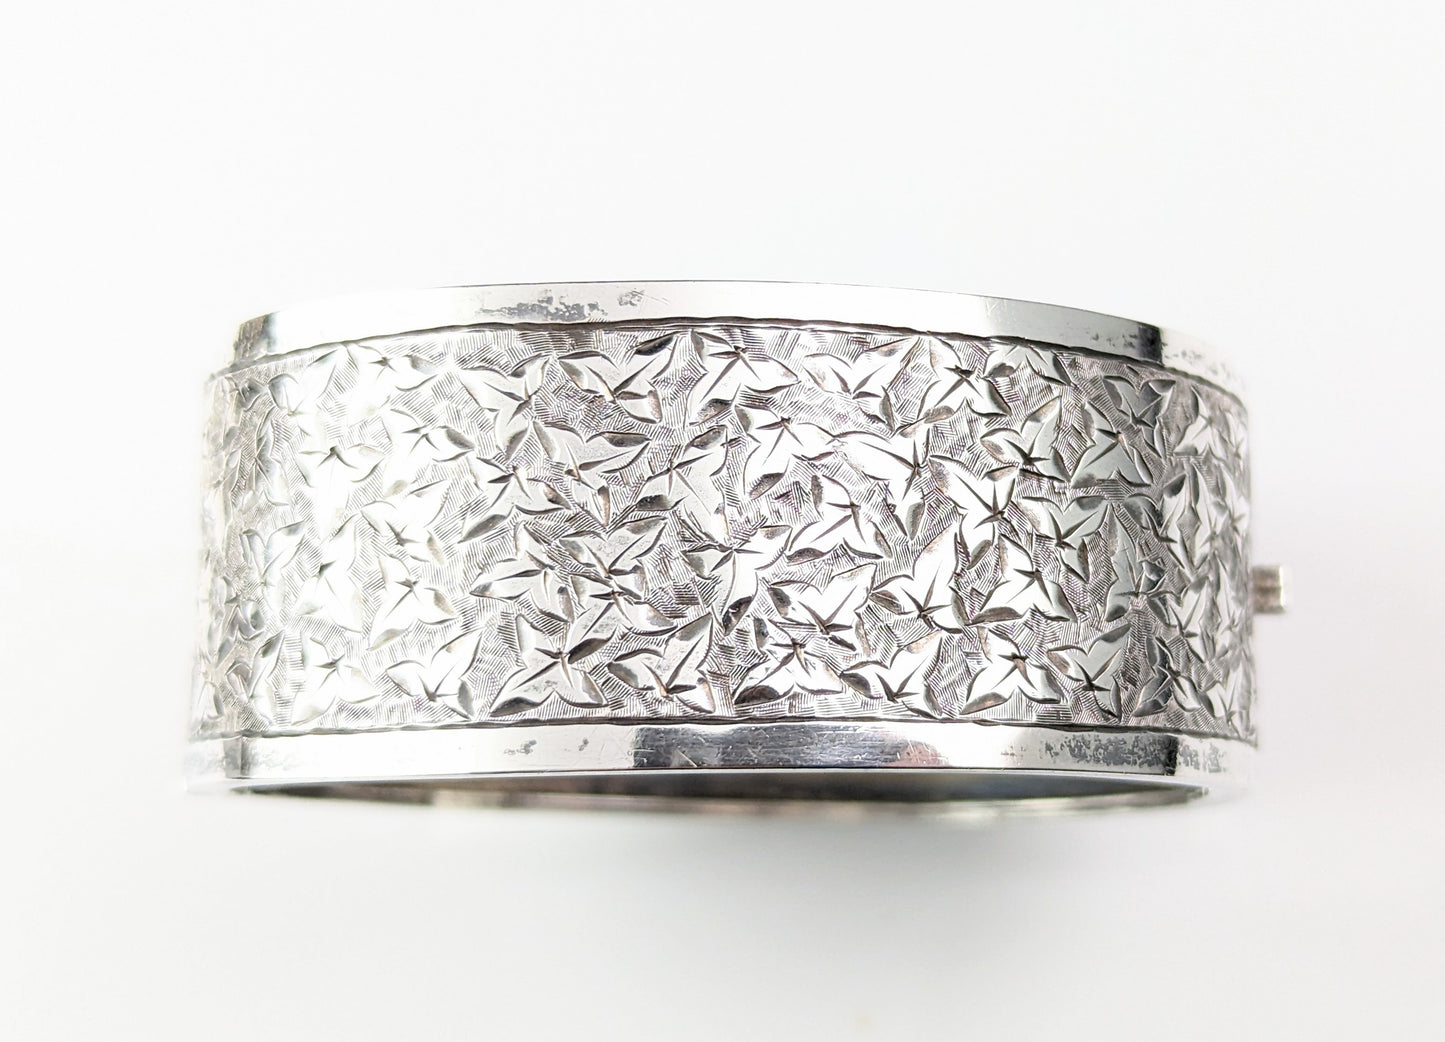 Antique silver bangle, wide, Ivy engraved, Victorian